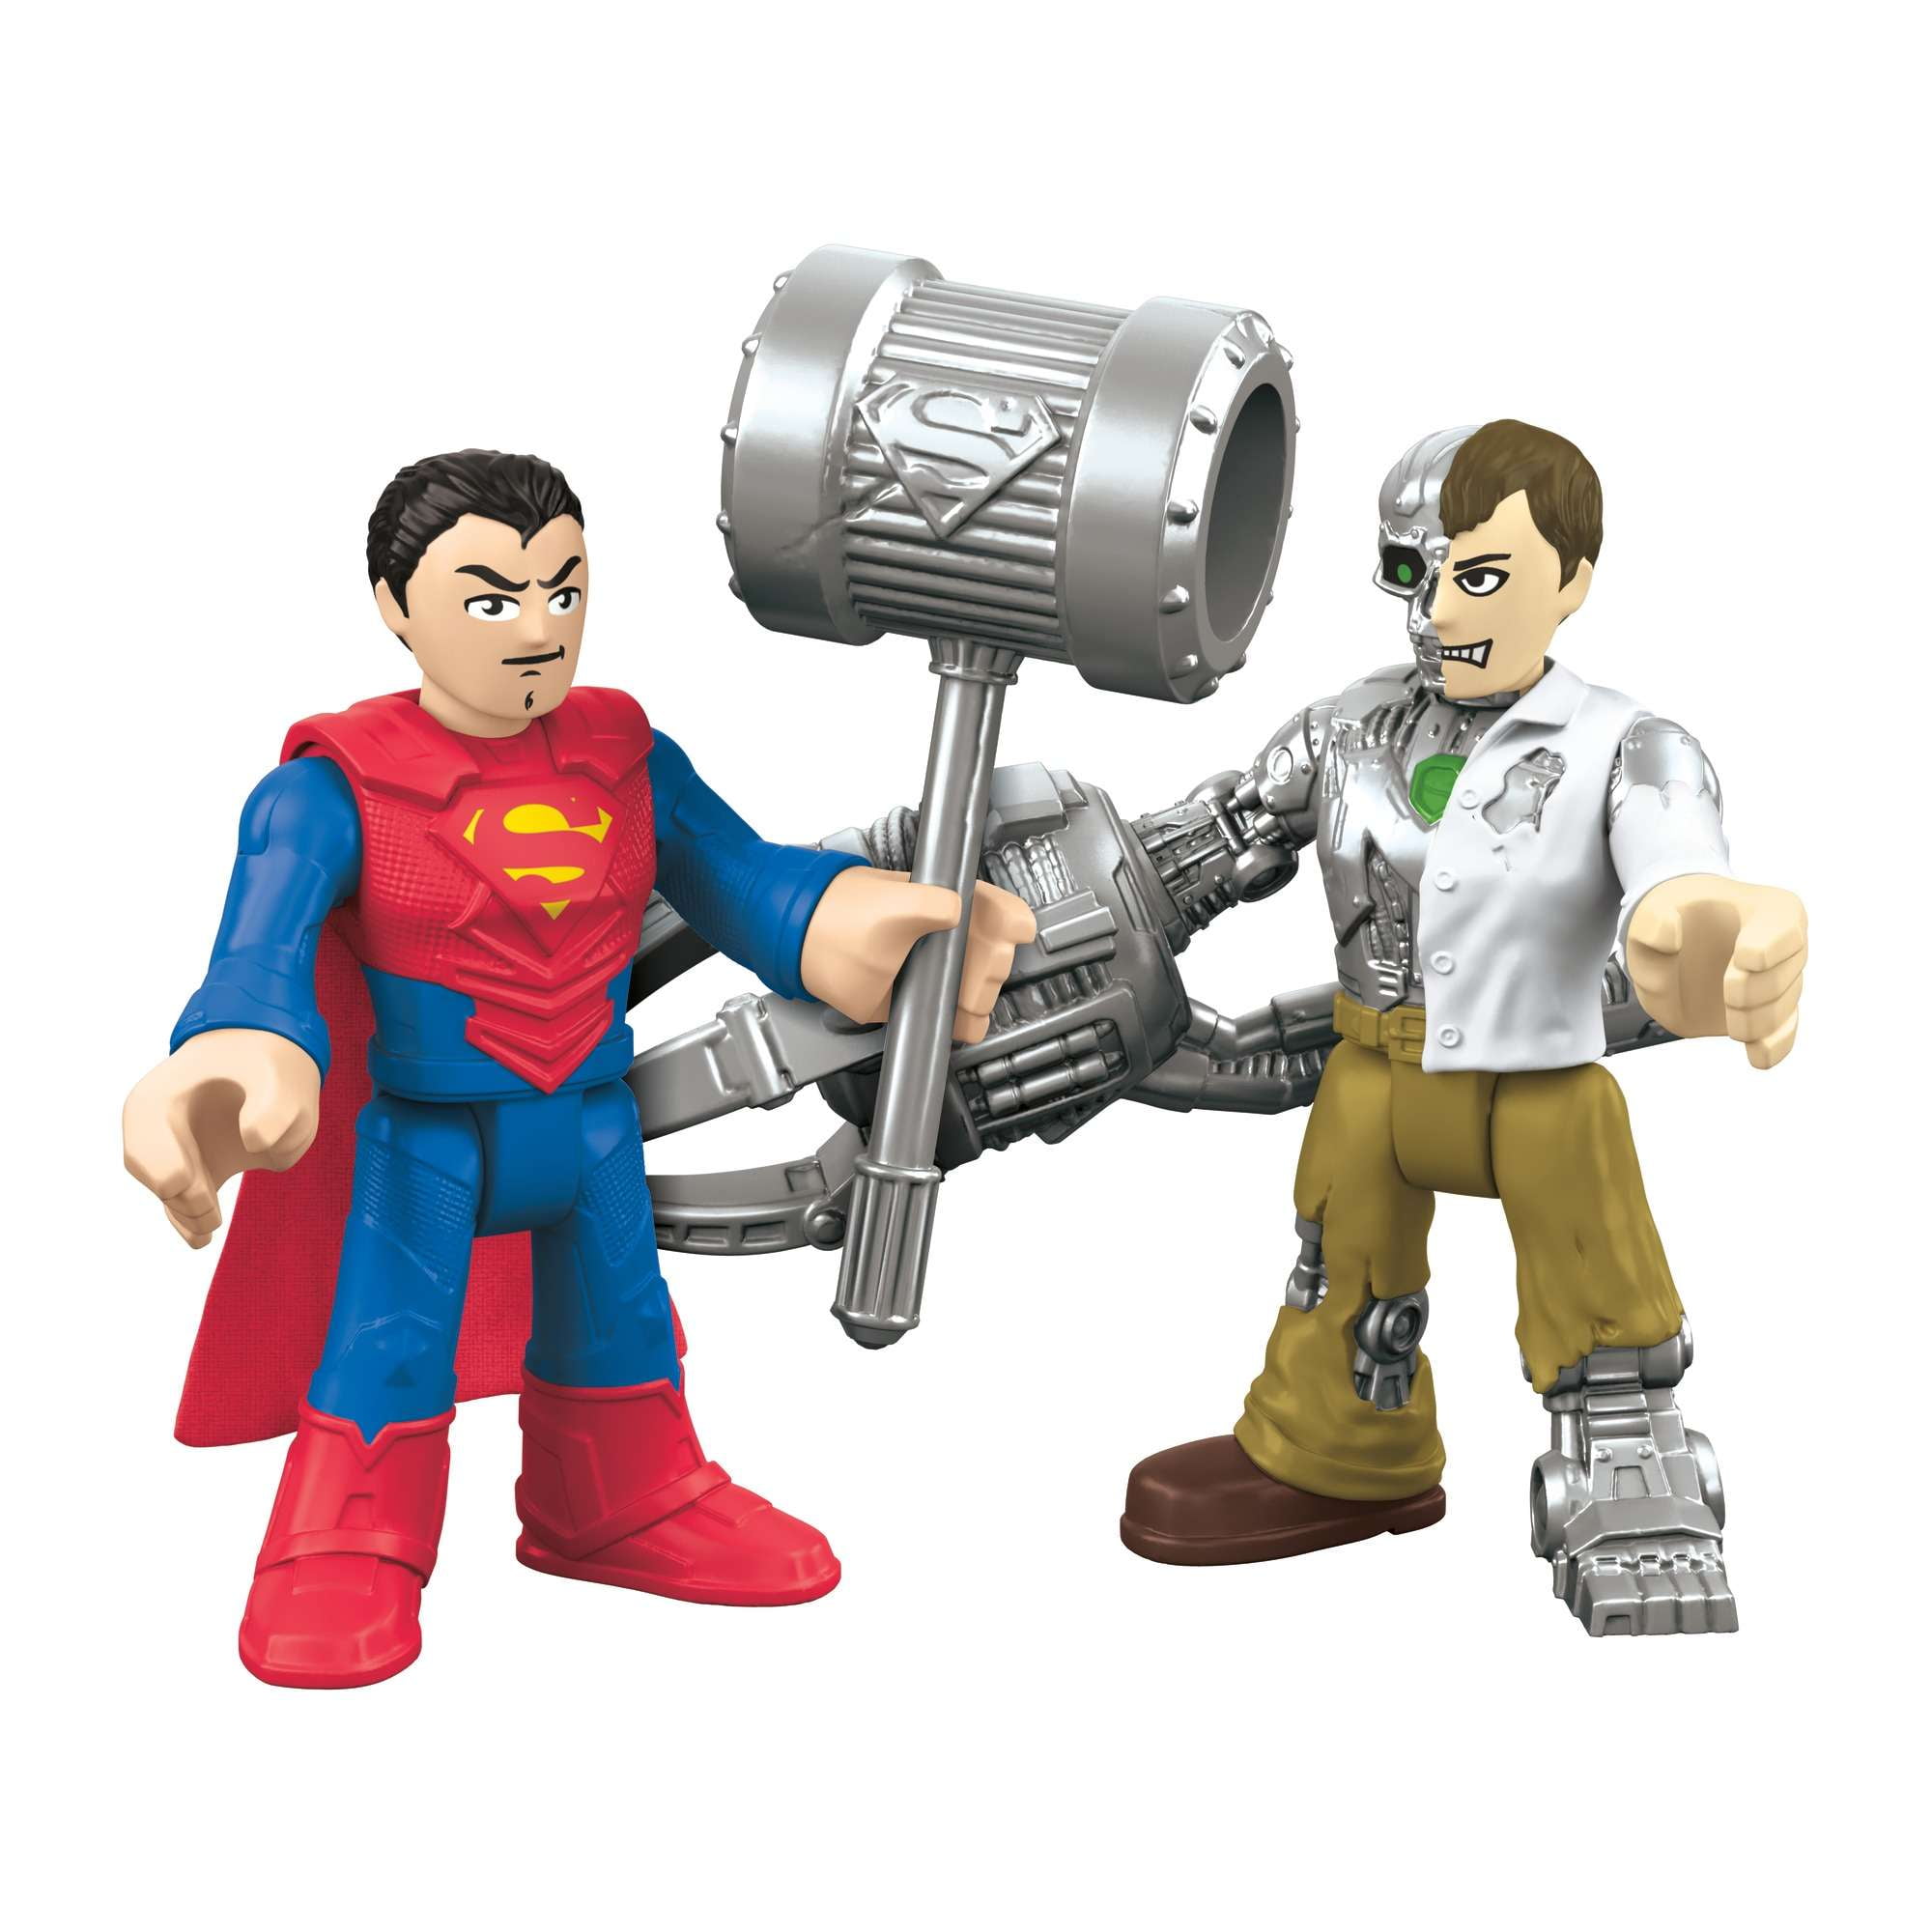 Reef Diver Fisher-Price Imaginext DC Super Friends